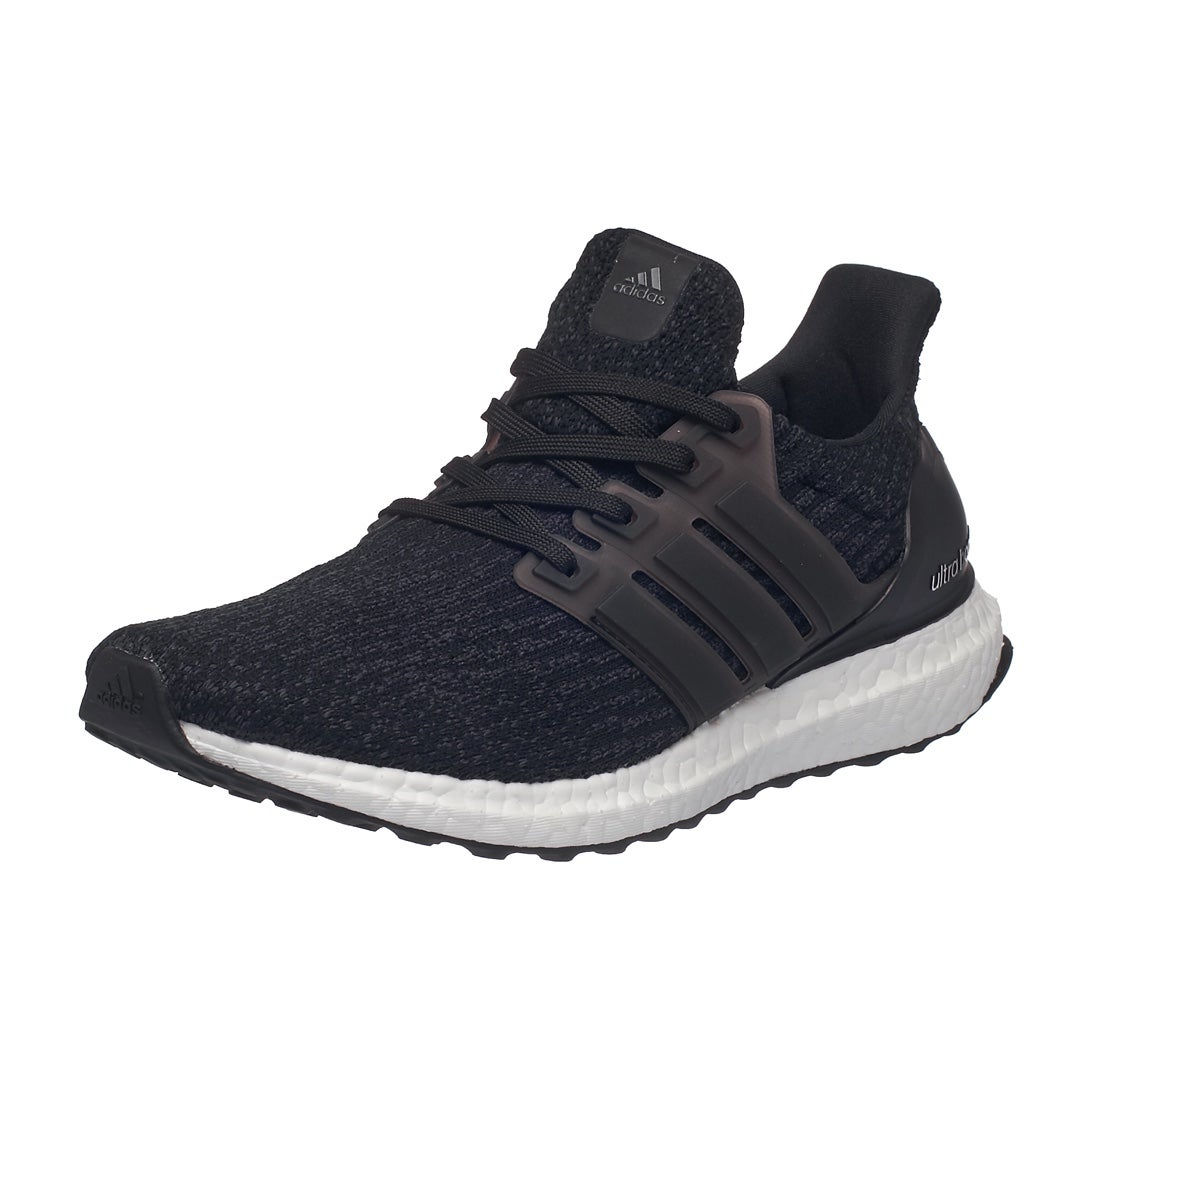 adidas Ultra Boost Women's Shoes Black 